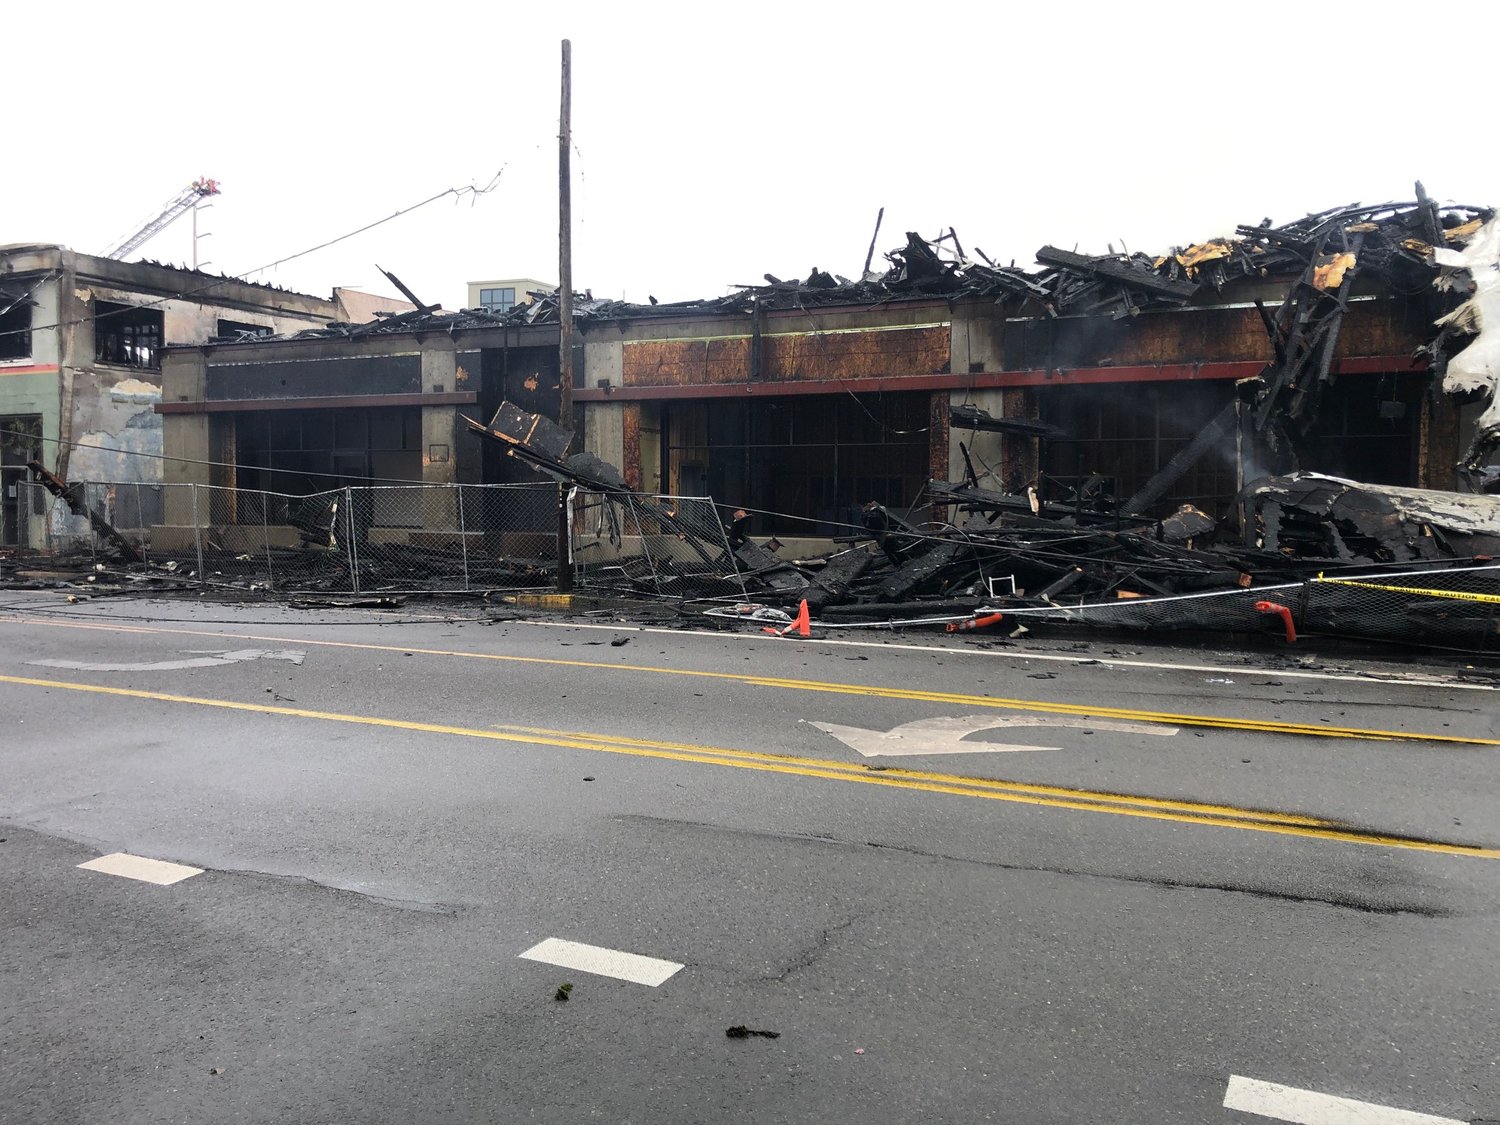 This is what remains of the five-story Market Flats apartment building, under construction at the corner of Capitol Way and Olympia Ave. in downtown Olympia following the fire on Dec. 15, 2021.